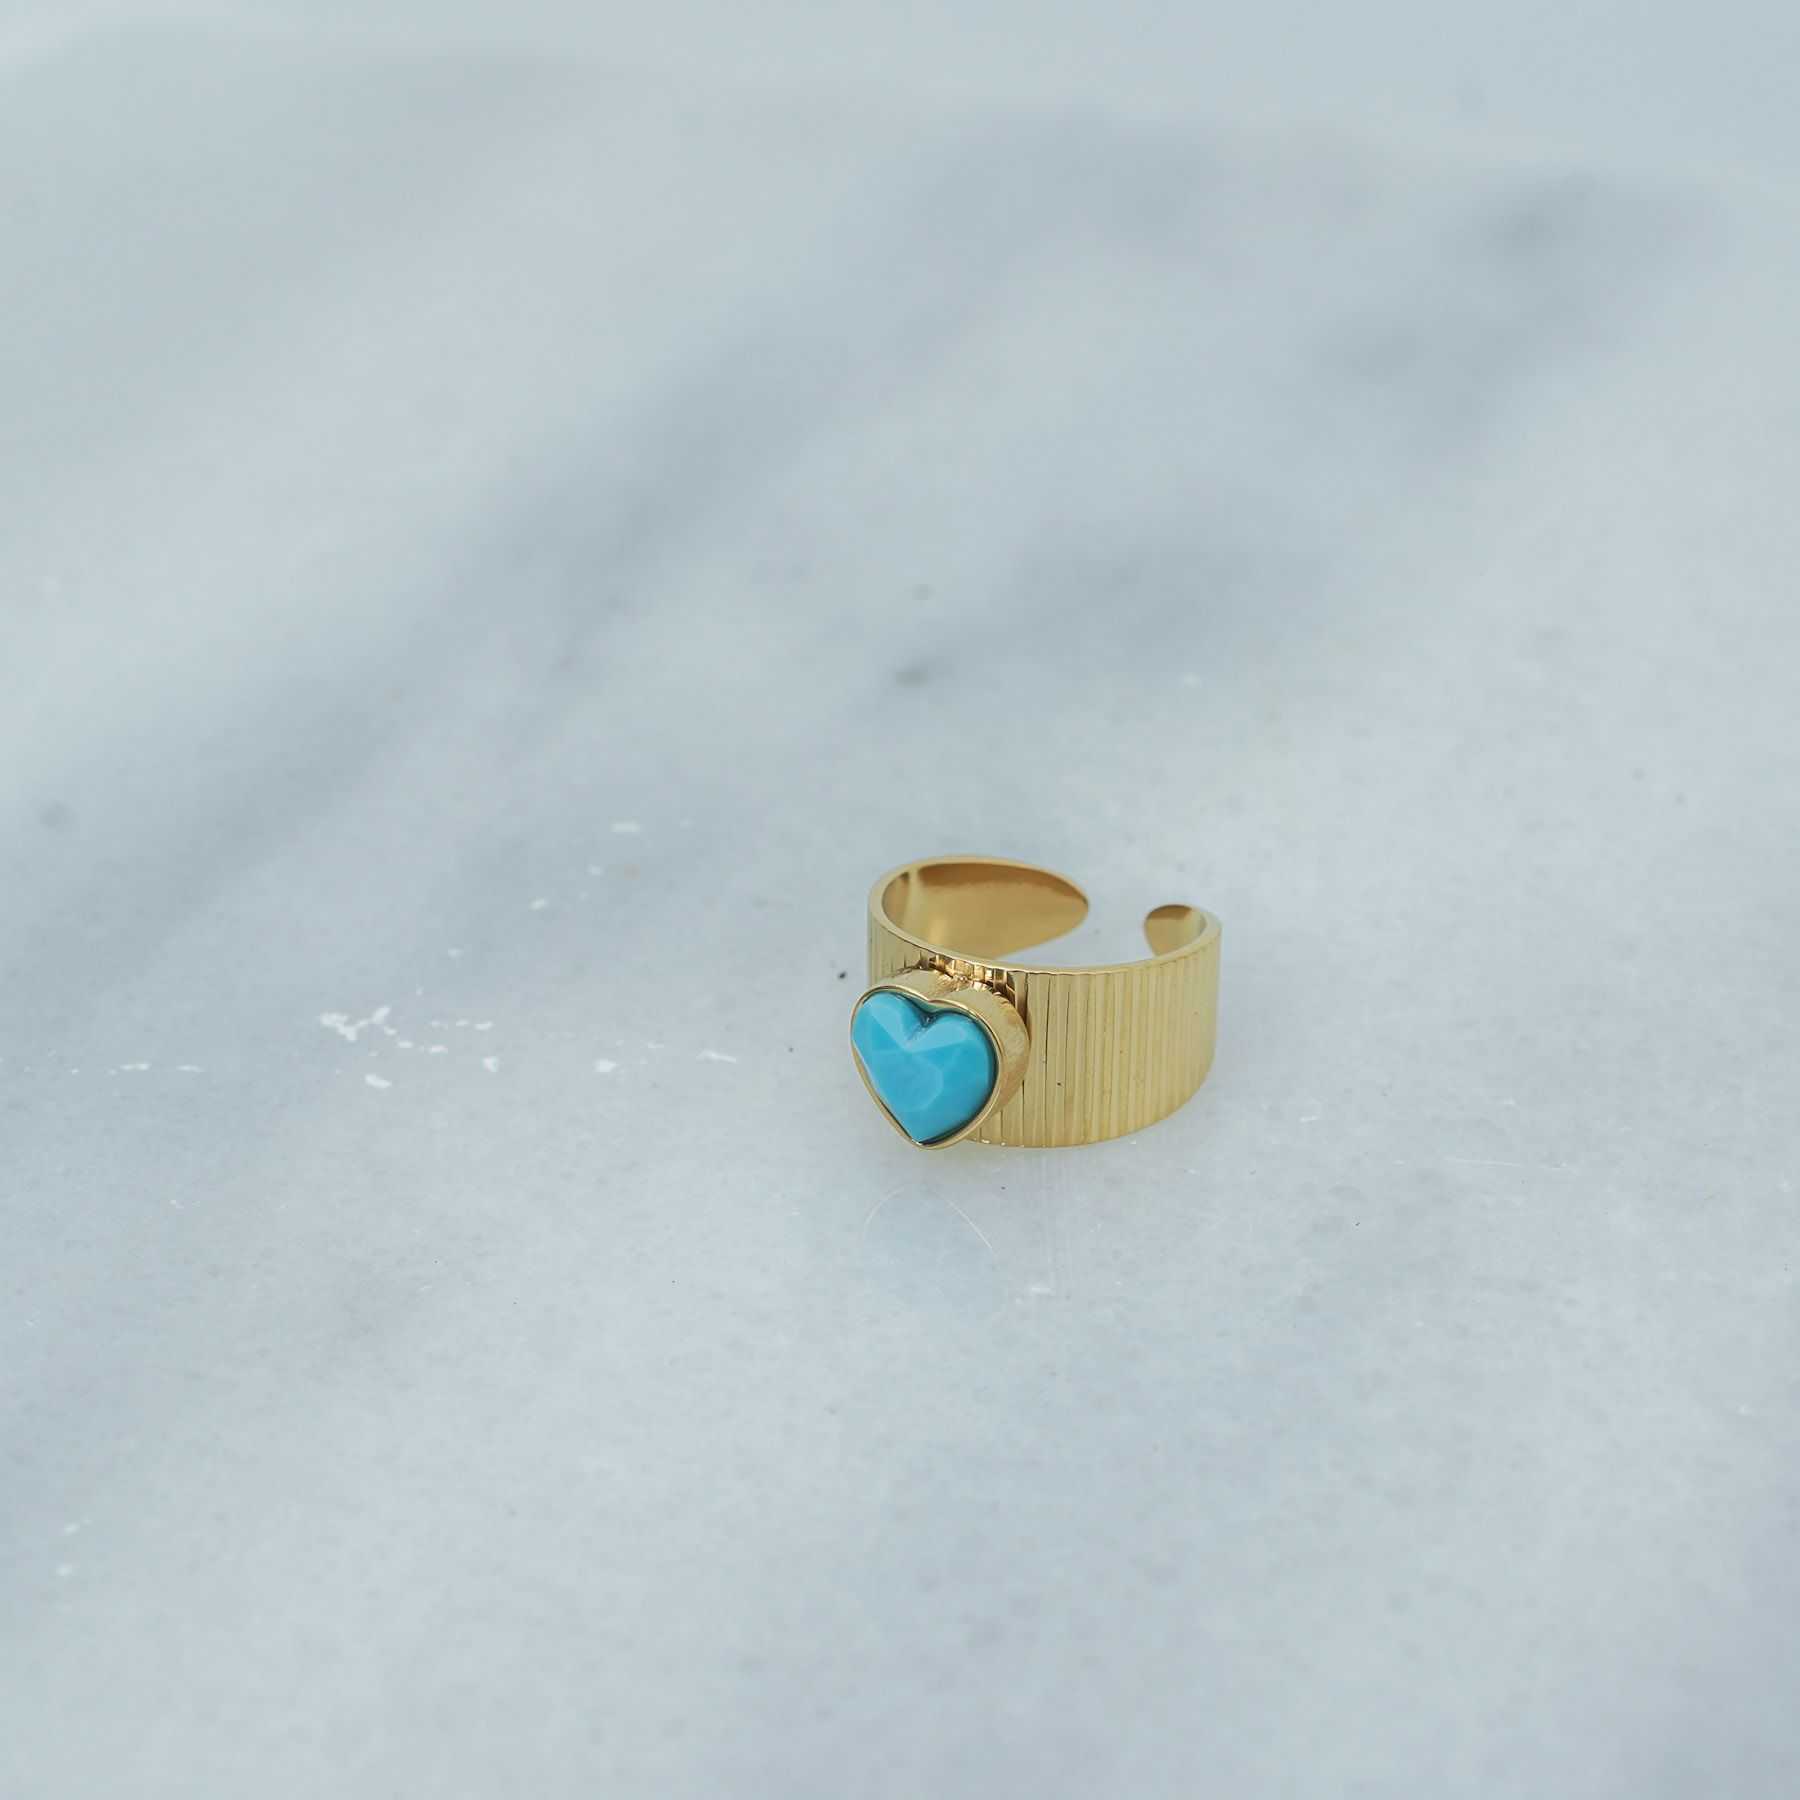 ANNIVERSARY RING - GOLD & BLUE